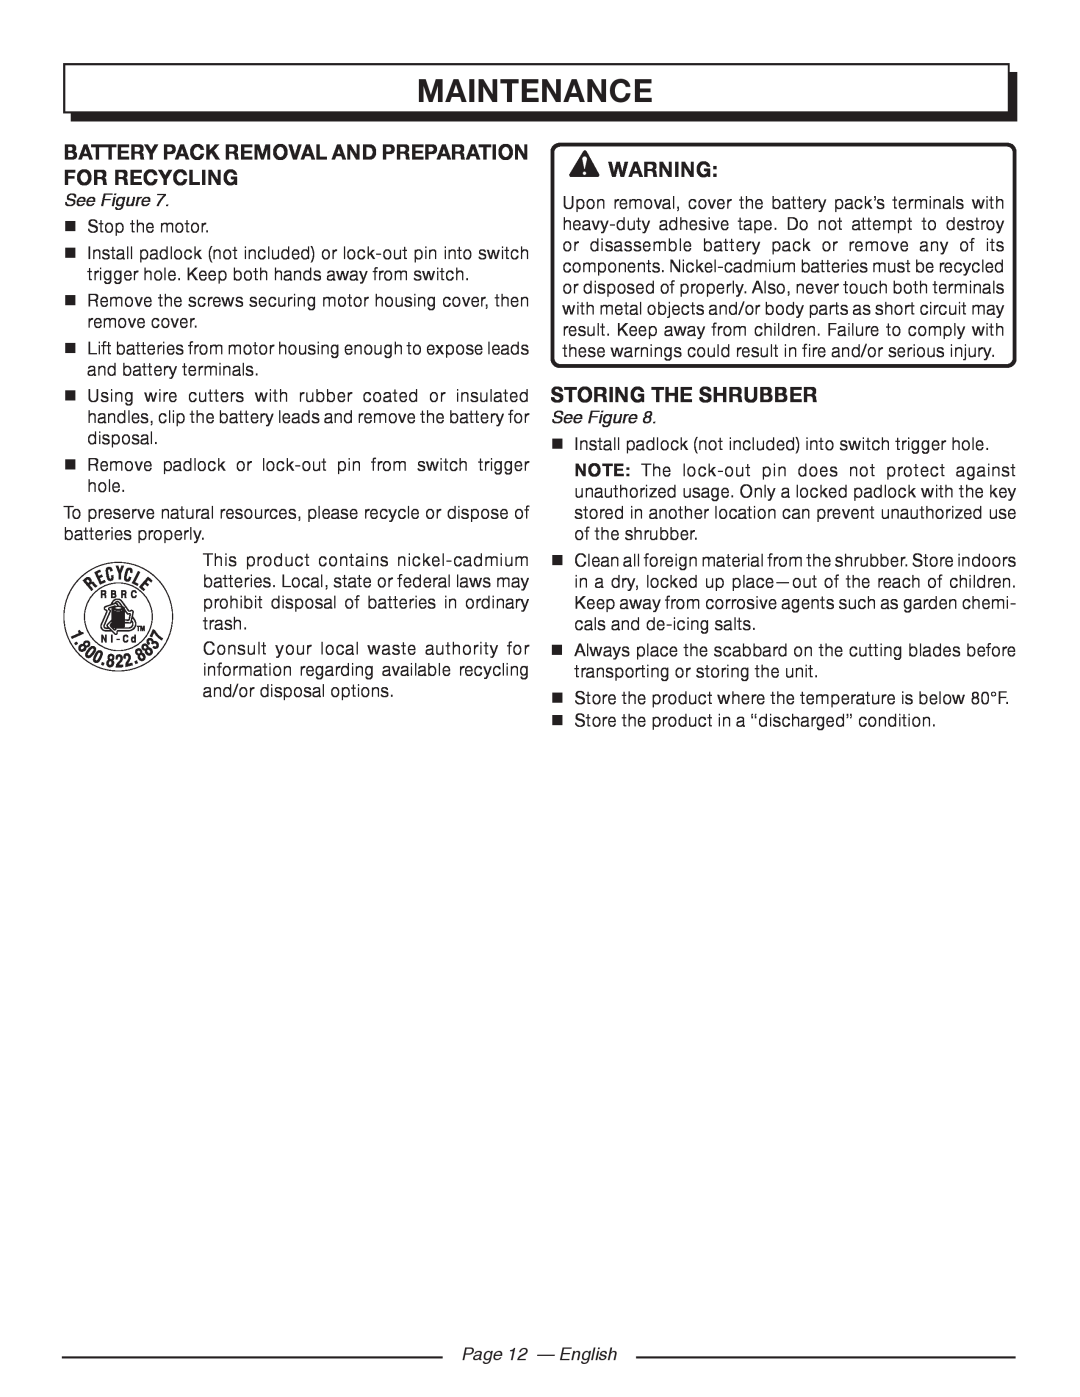 Homelite UT44171 Battery Pack Removal And Preparation For Recycling, STORing the Shrubber, Page 12 - English, Maintenance 